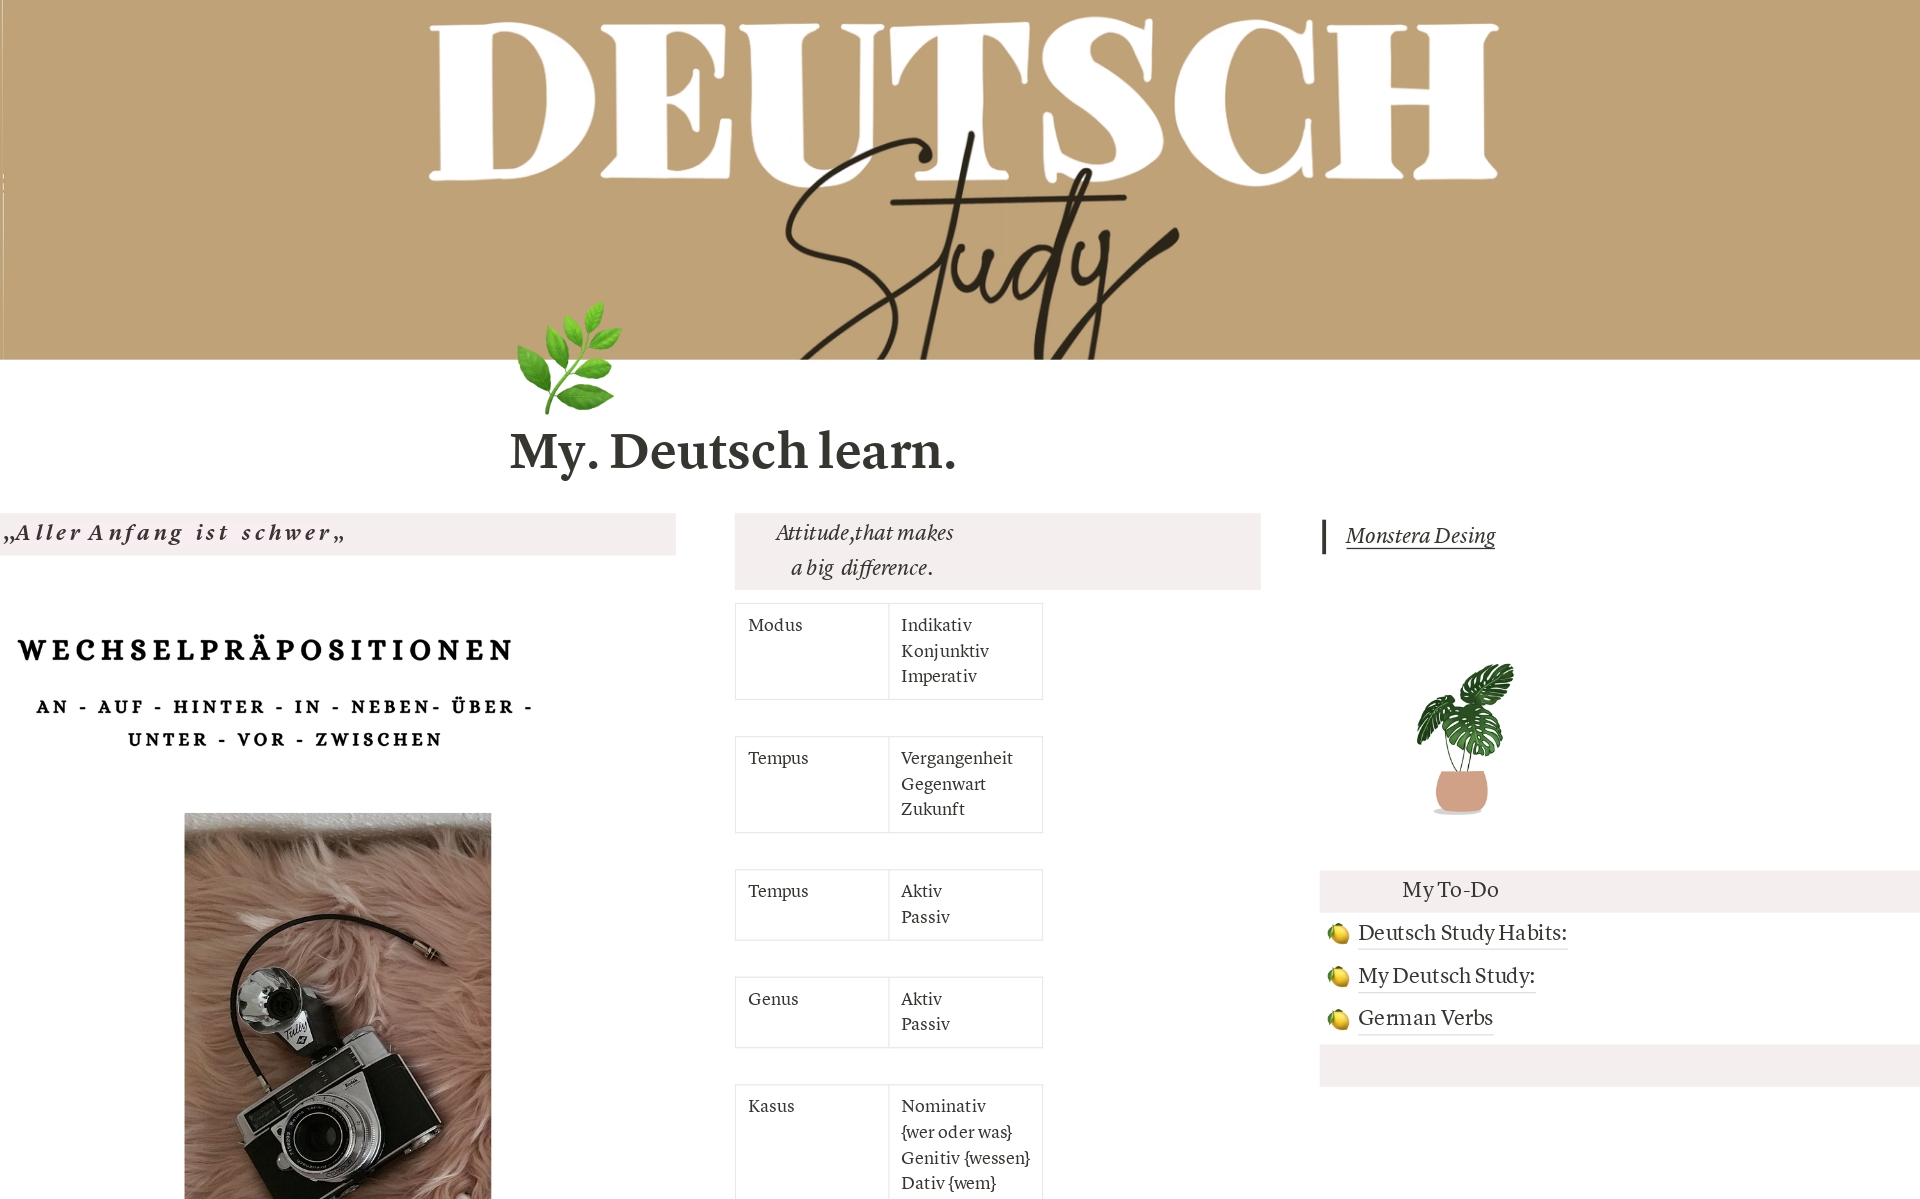 In this template you have the organization you need to study the German language, provides you with a list of 20 verbs with their respective fixed prepositions and a tracker for your study habits. You have a section to organize your grammar themes and your first lesson. 